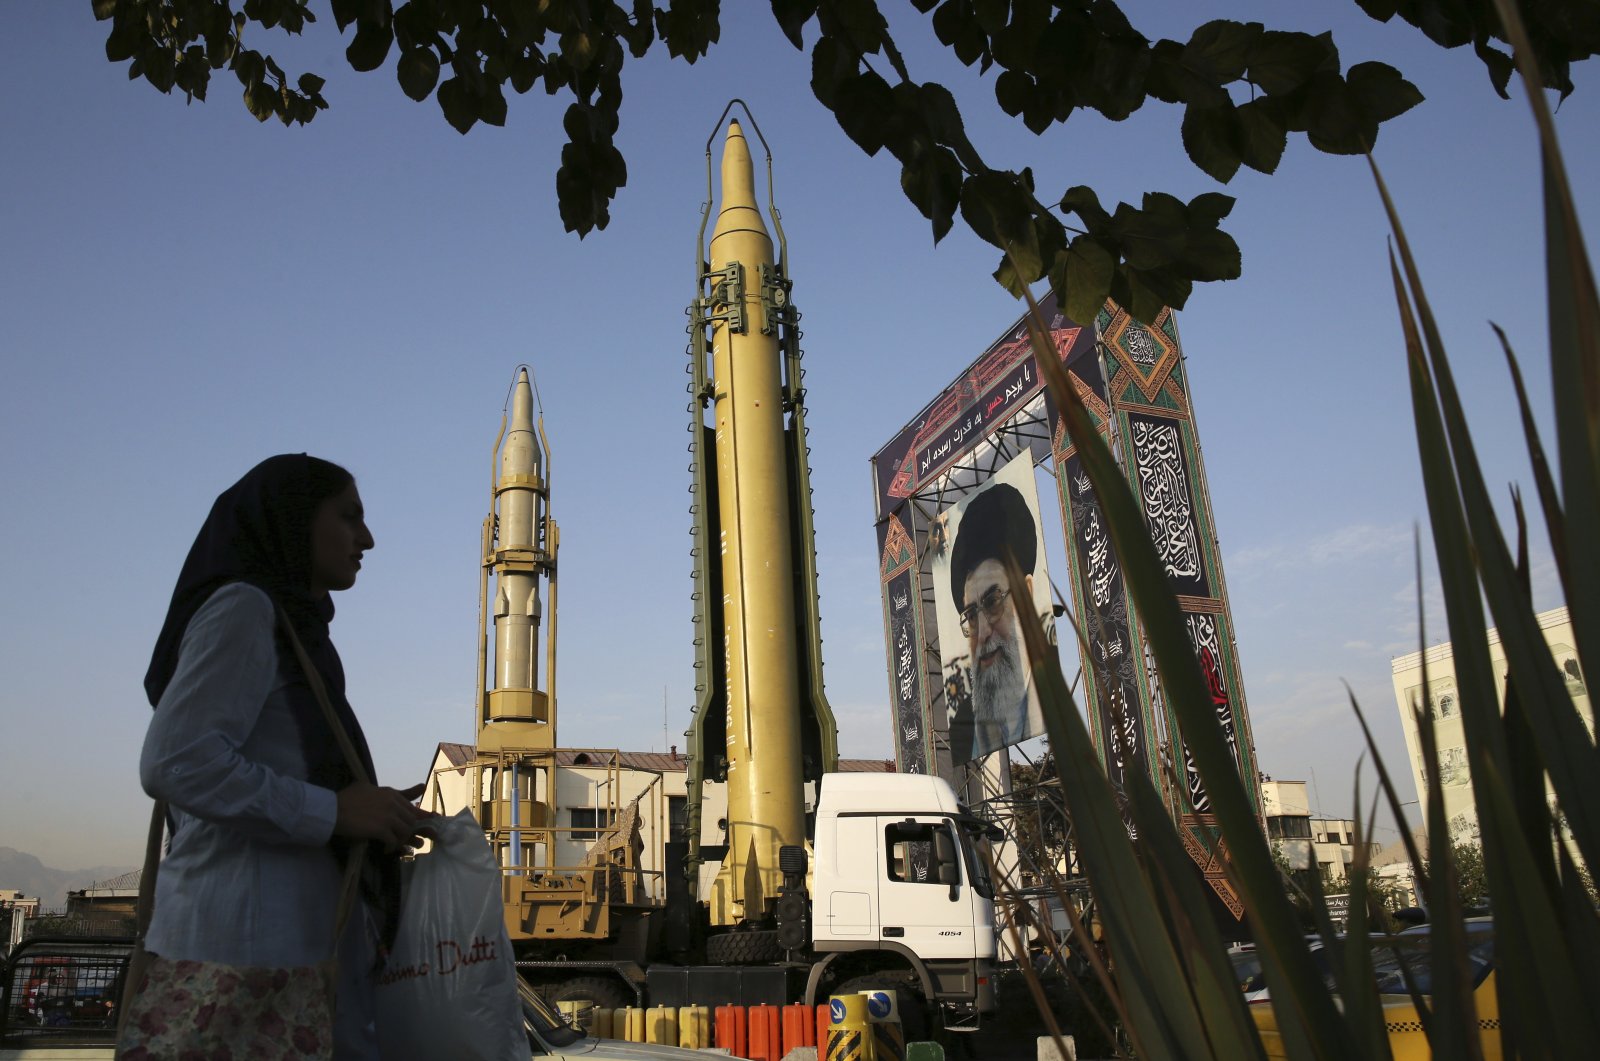 FILE - A Ghadr-H missile, center, a solid-fuel surface-to-surface Sejjil missile and a portrait of the Supreme Leader Ayatollah Ali Khamenei are on display for the annual Defense Week, marking the 37th anniversary of the 1980s Iran-Iraq war, at Baharestan Sq. in Tehran, Iran, Sept. 24, 2017. (AP File Photo)